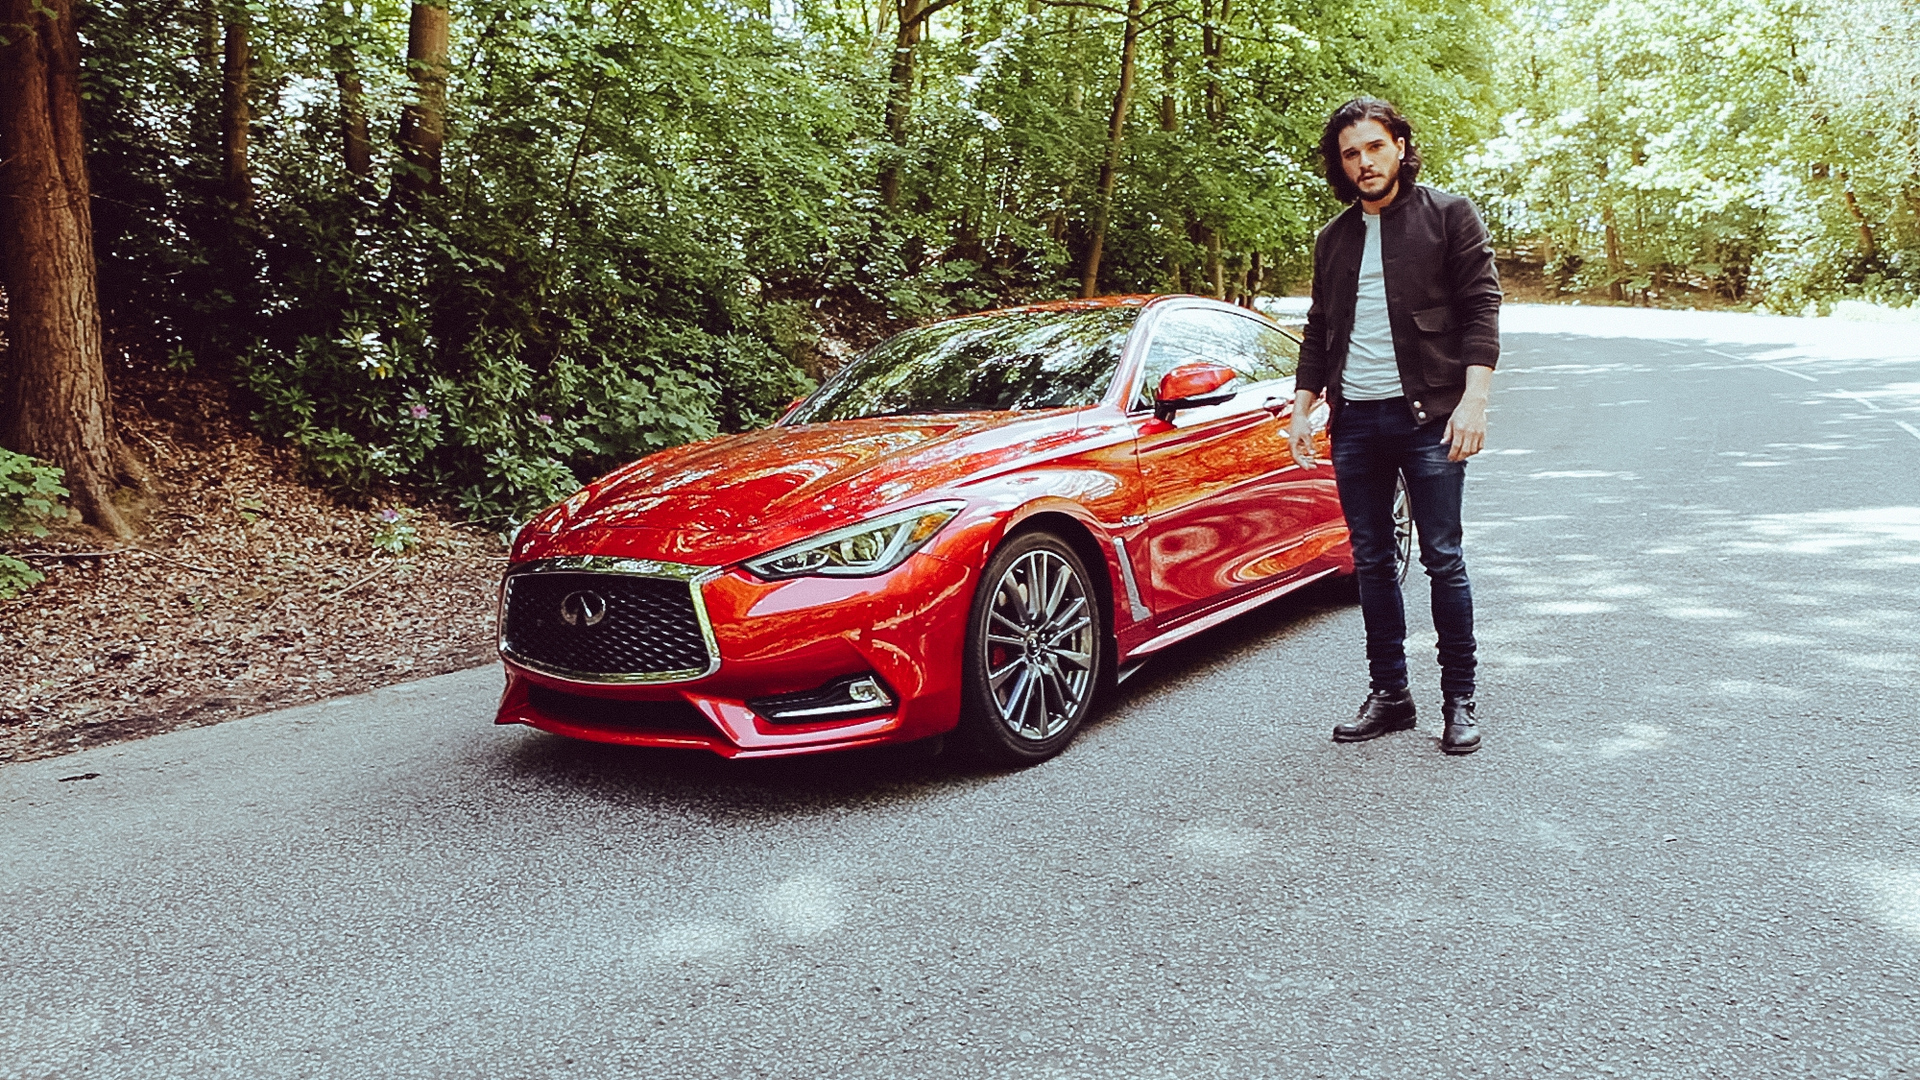 Kit Harington takes the new INFINITI Q60 for an empowered drive © Nissan Motor Co., Ltd.